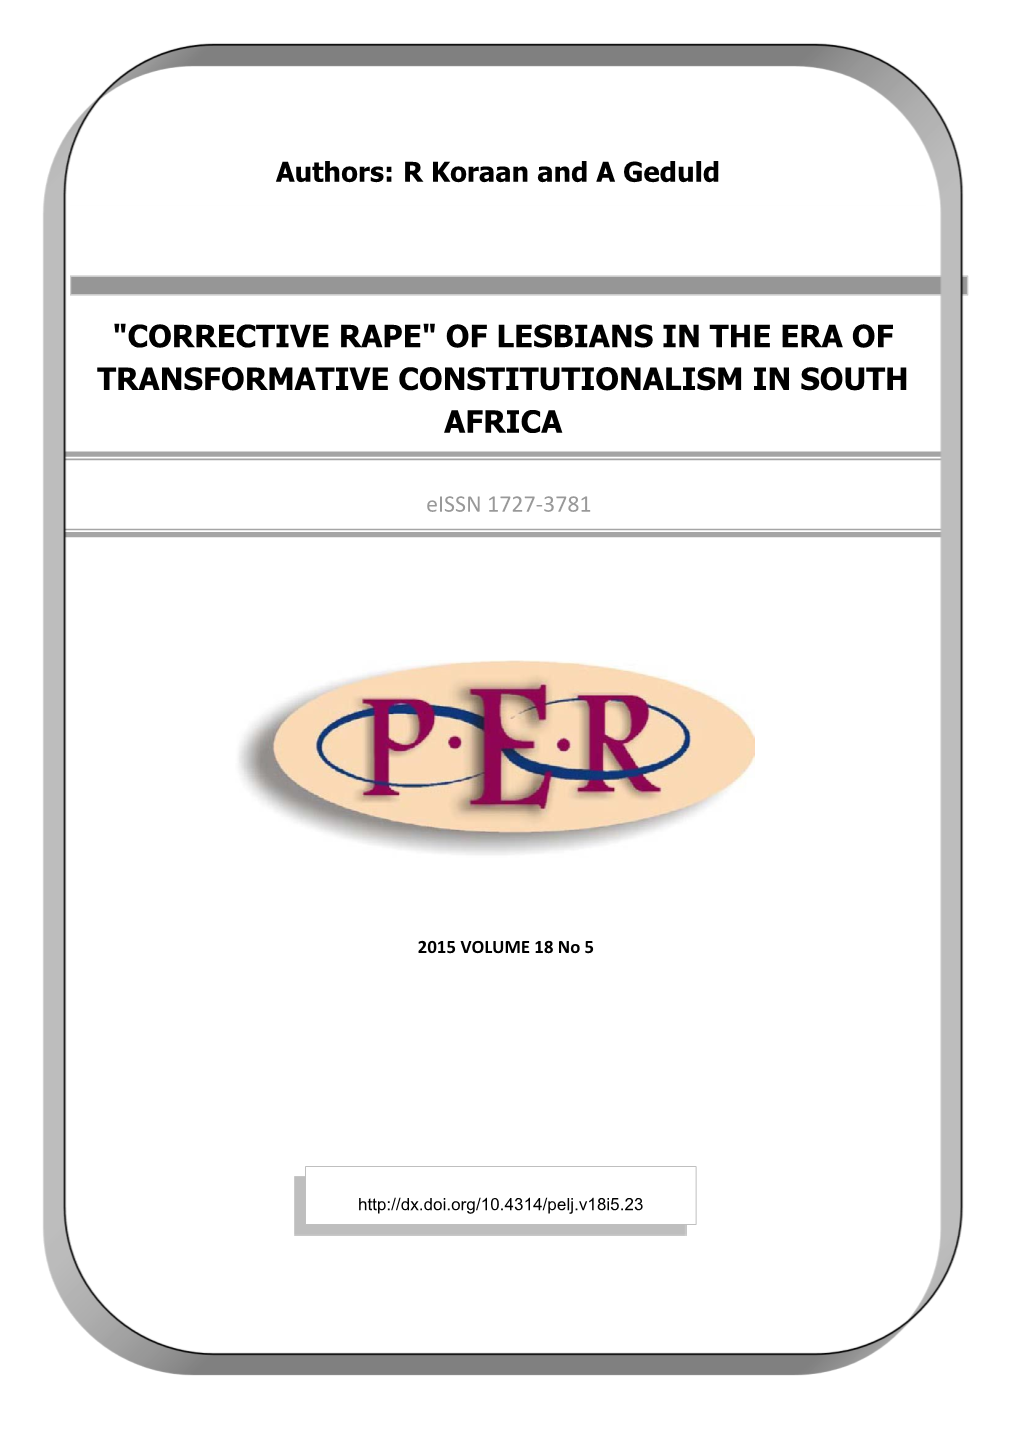 Corrective Rape" of Lesbians in the Era of Transformative Constitutionalism in South Africa